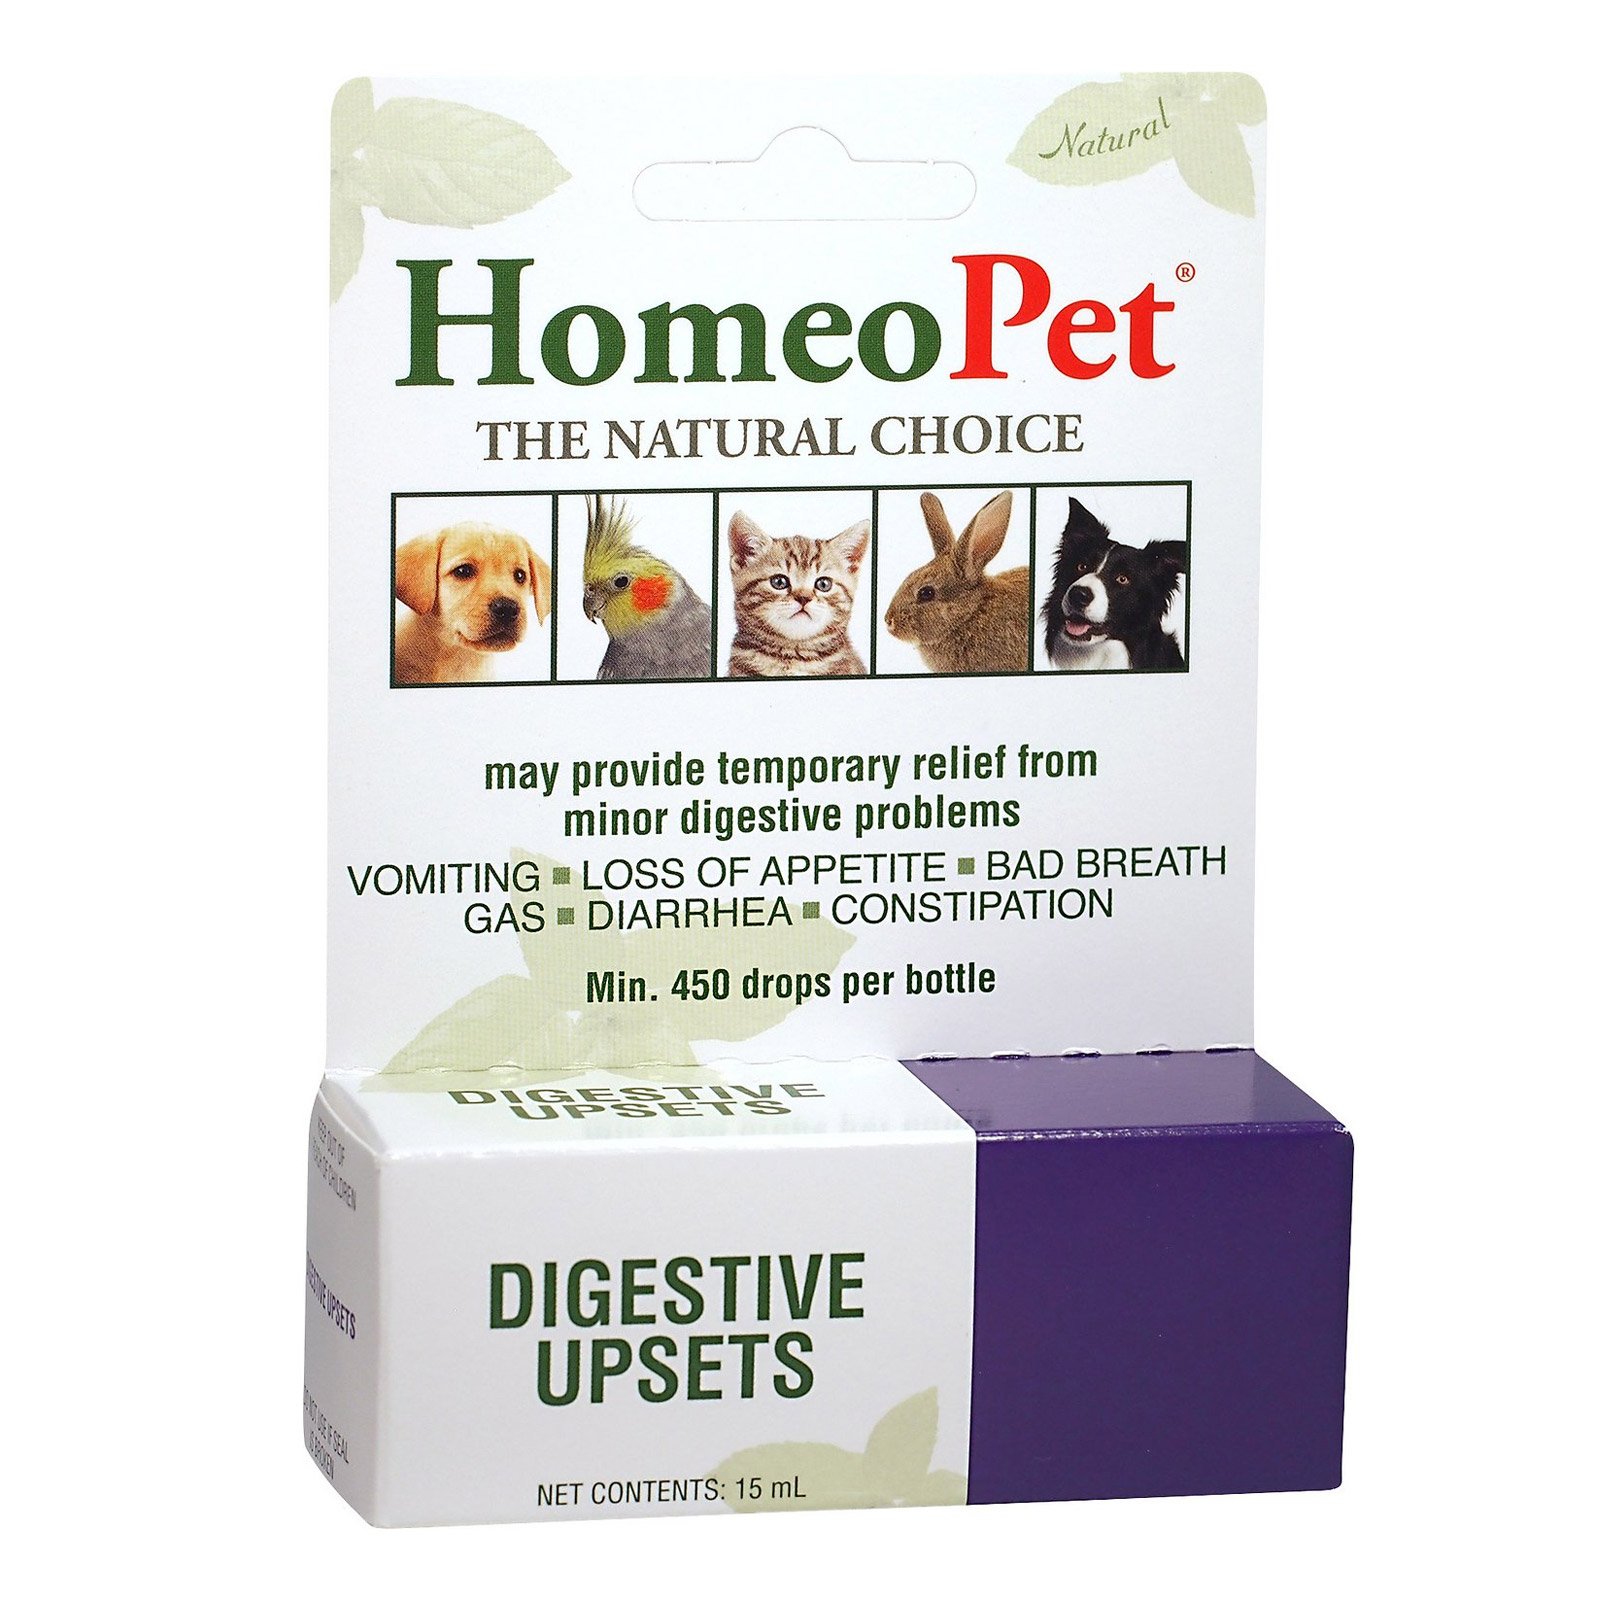 Digestive-Upsets-For-DogsCats-214589.jpg